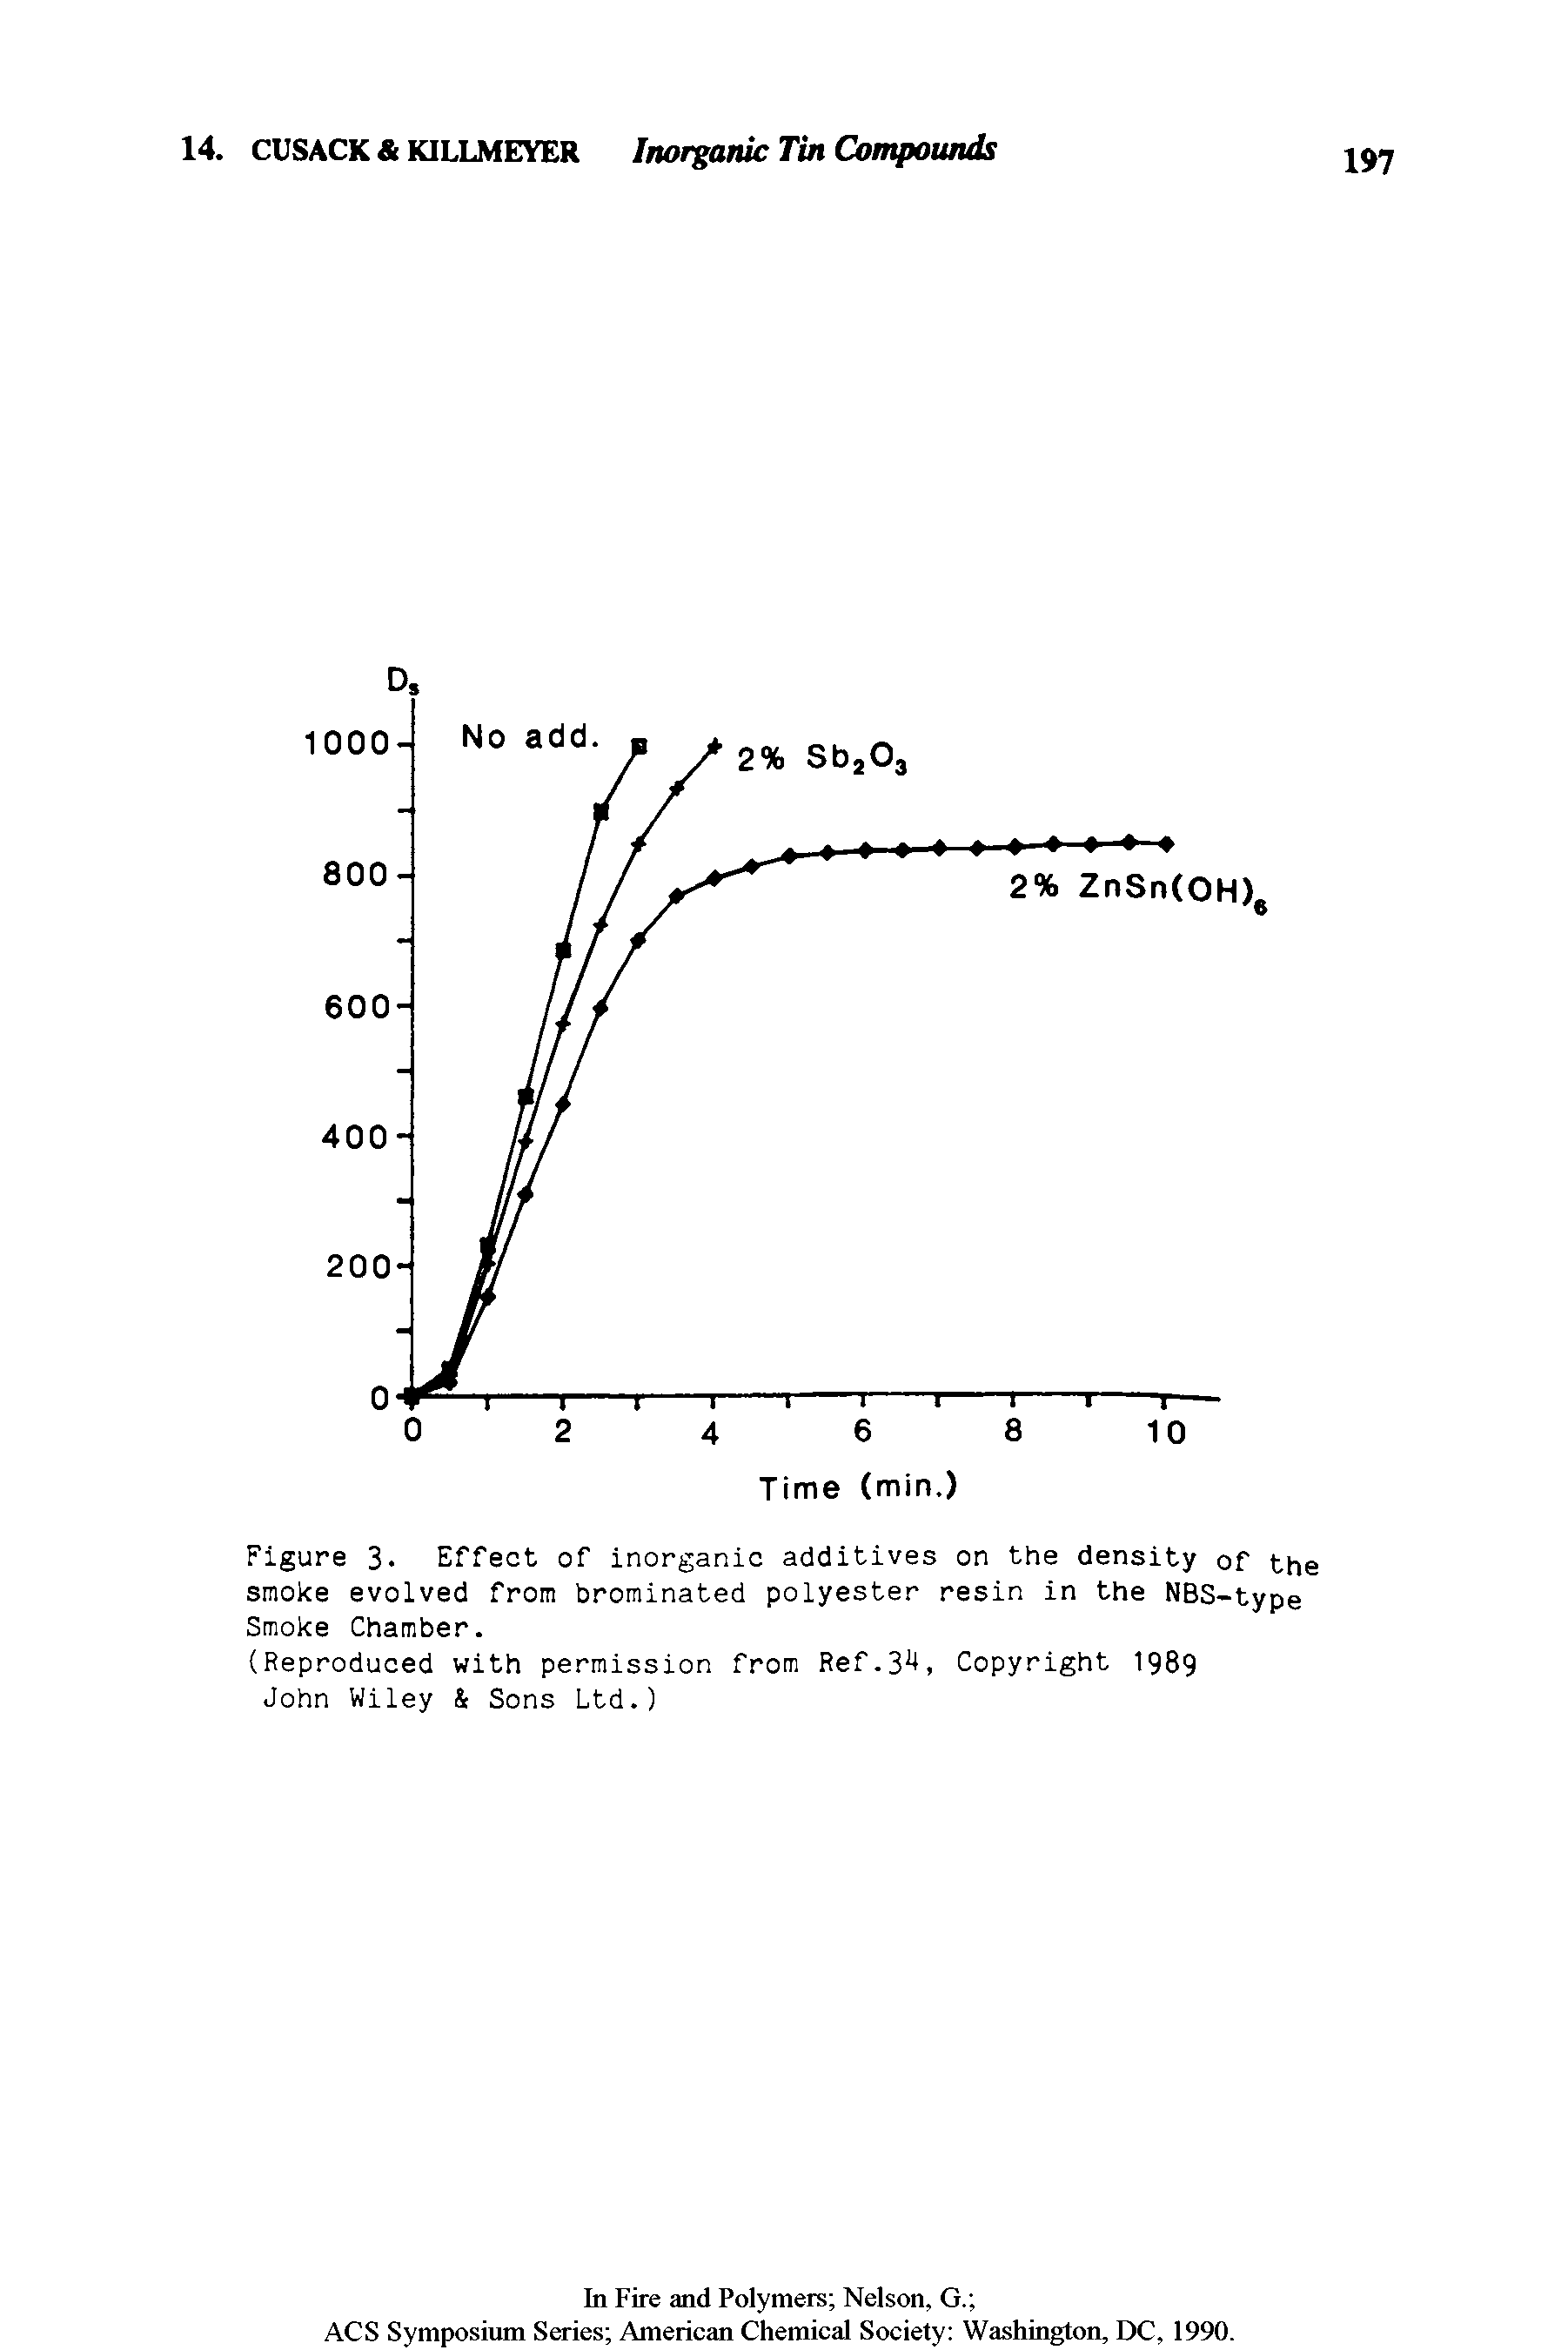 Figure 3. Effect of inorganic additives on the density of the smoke evolved from brominated polyester resin in the NBS-type Smoke Chamber.